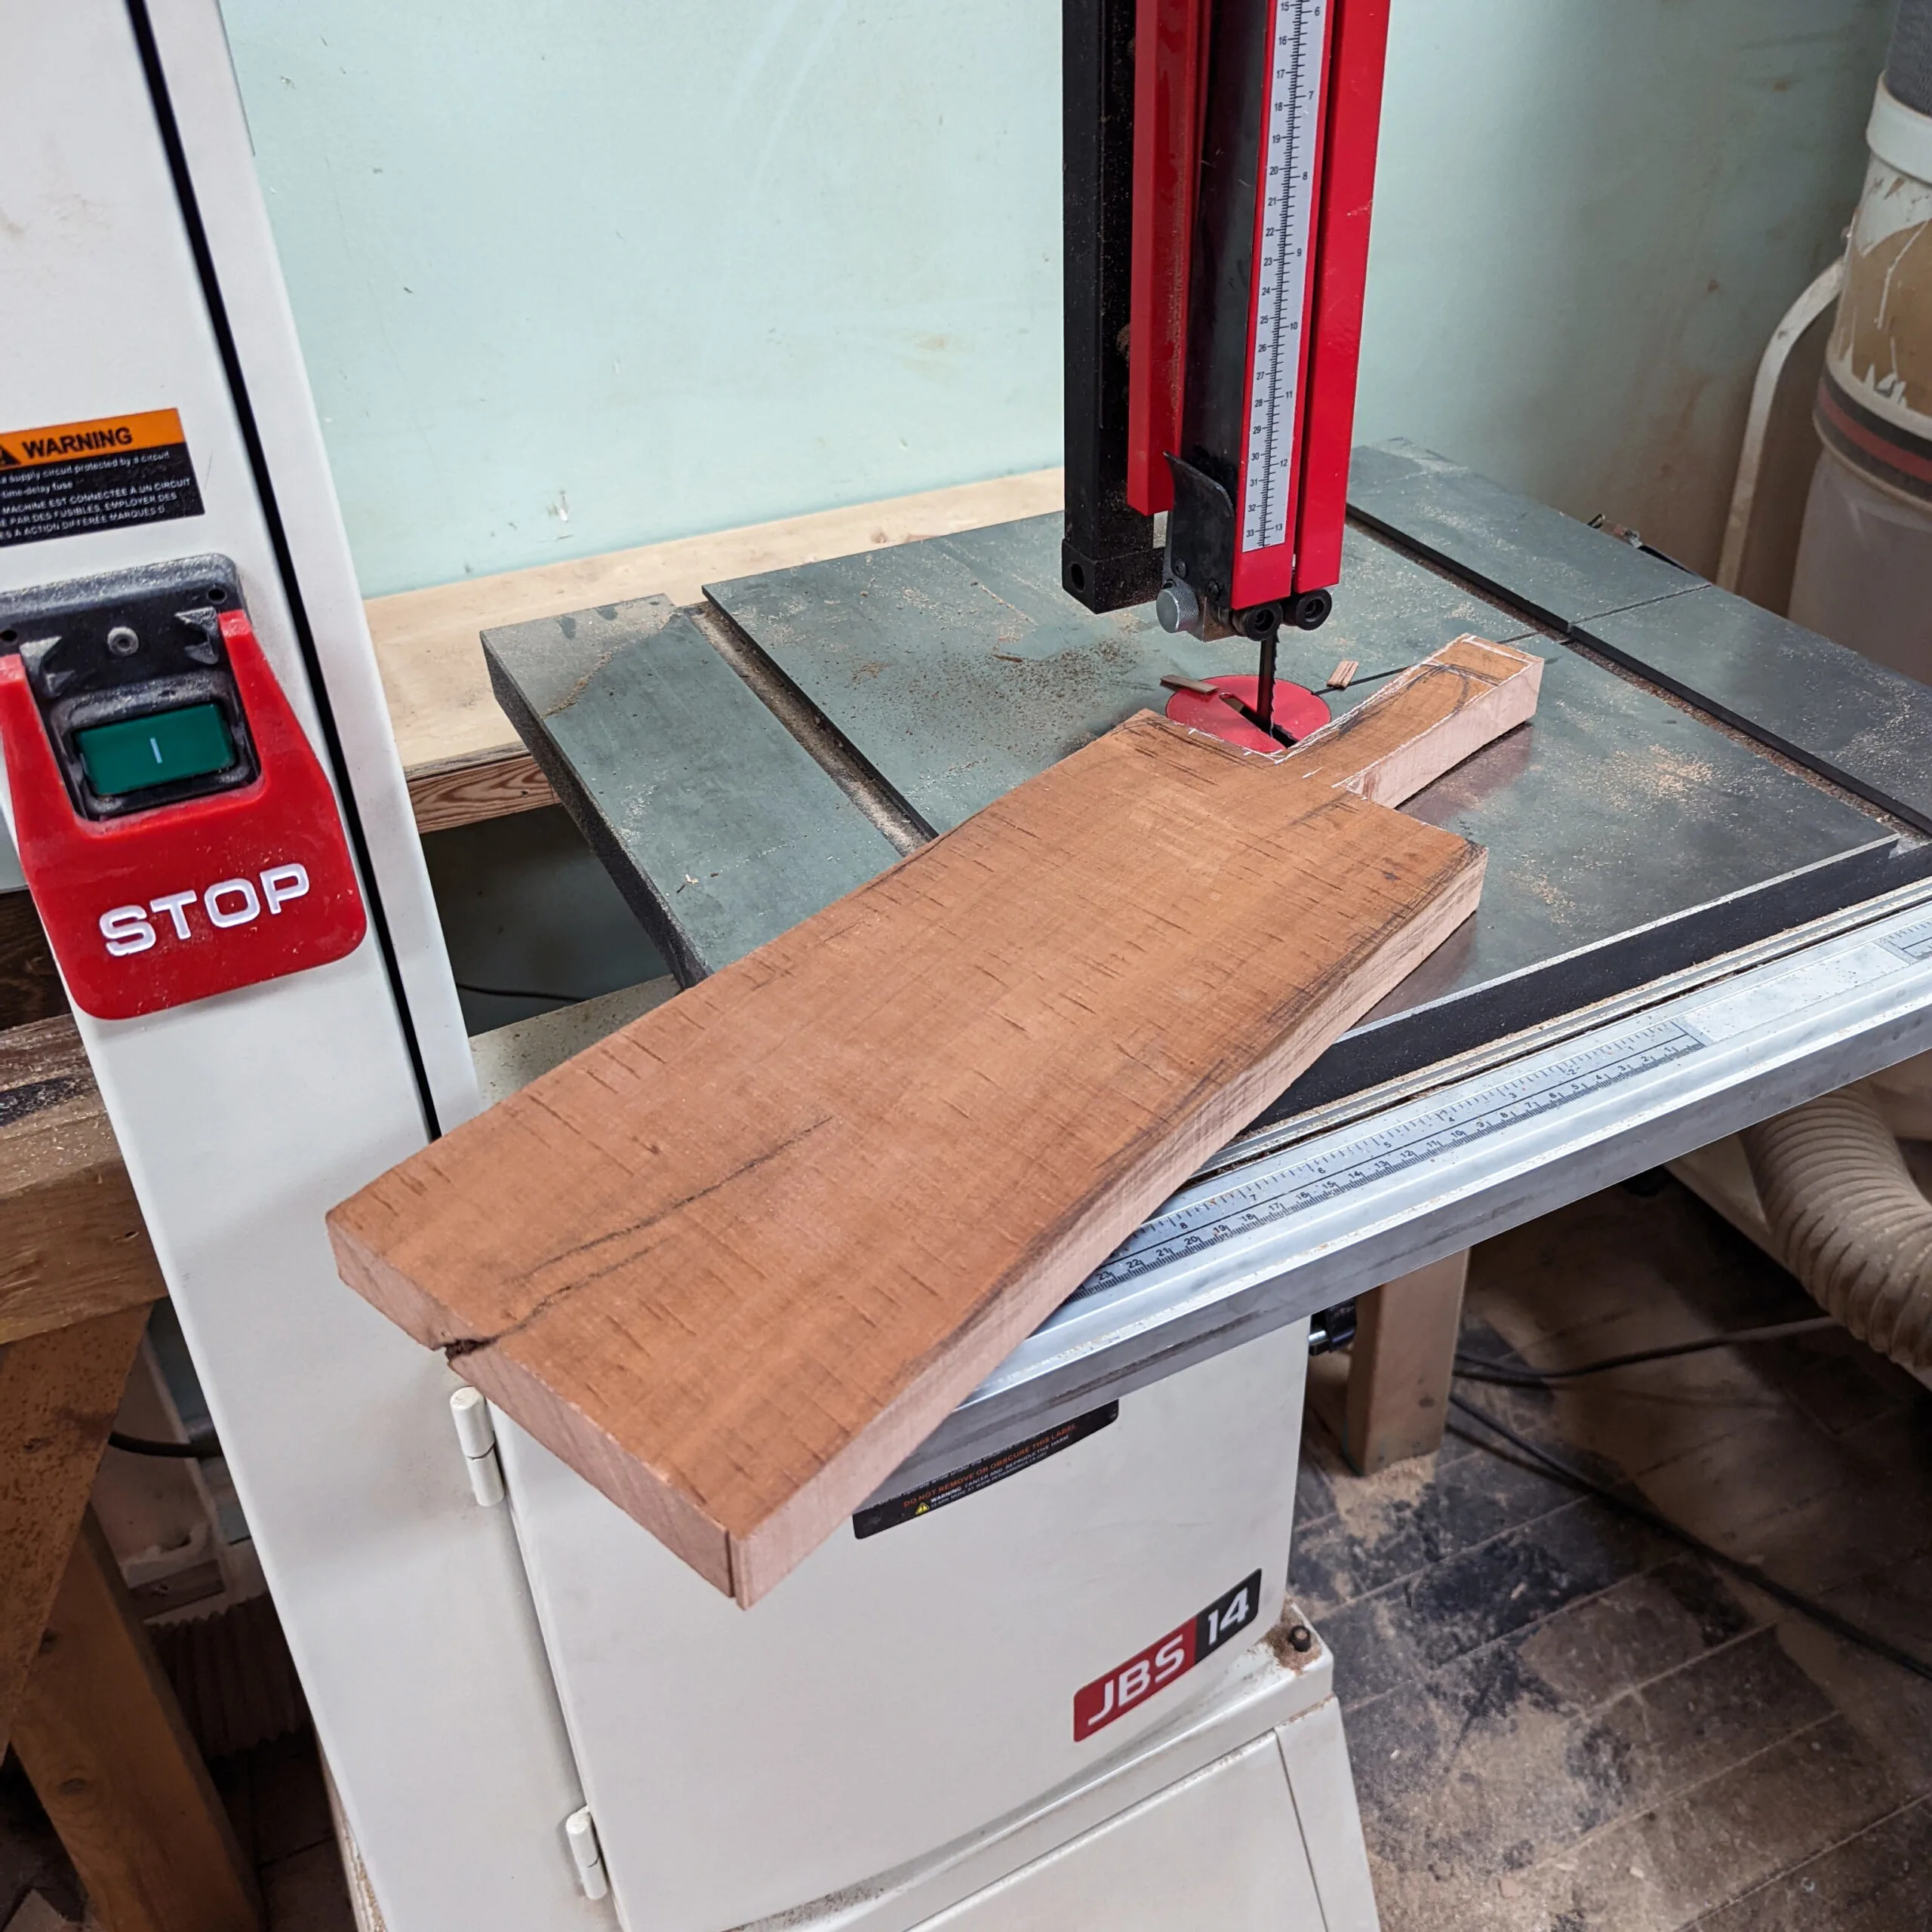 Cutting a plank of cherry wood into the shape of a cutting board using a large bandsaw in a community workshop in St. Louis.